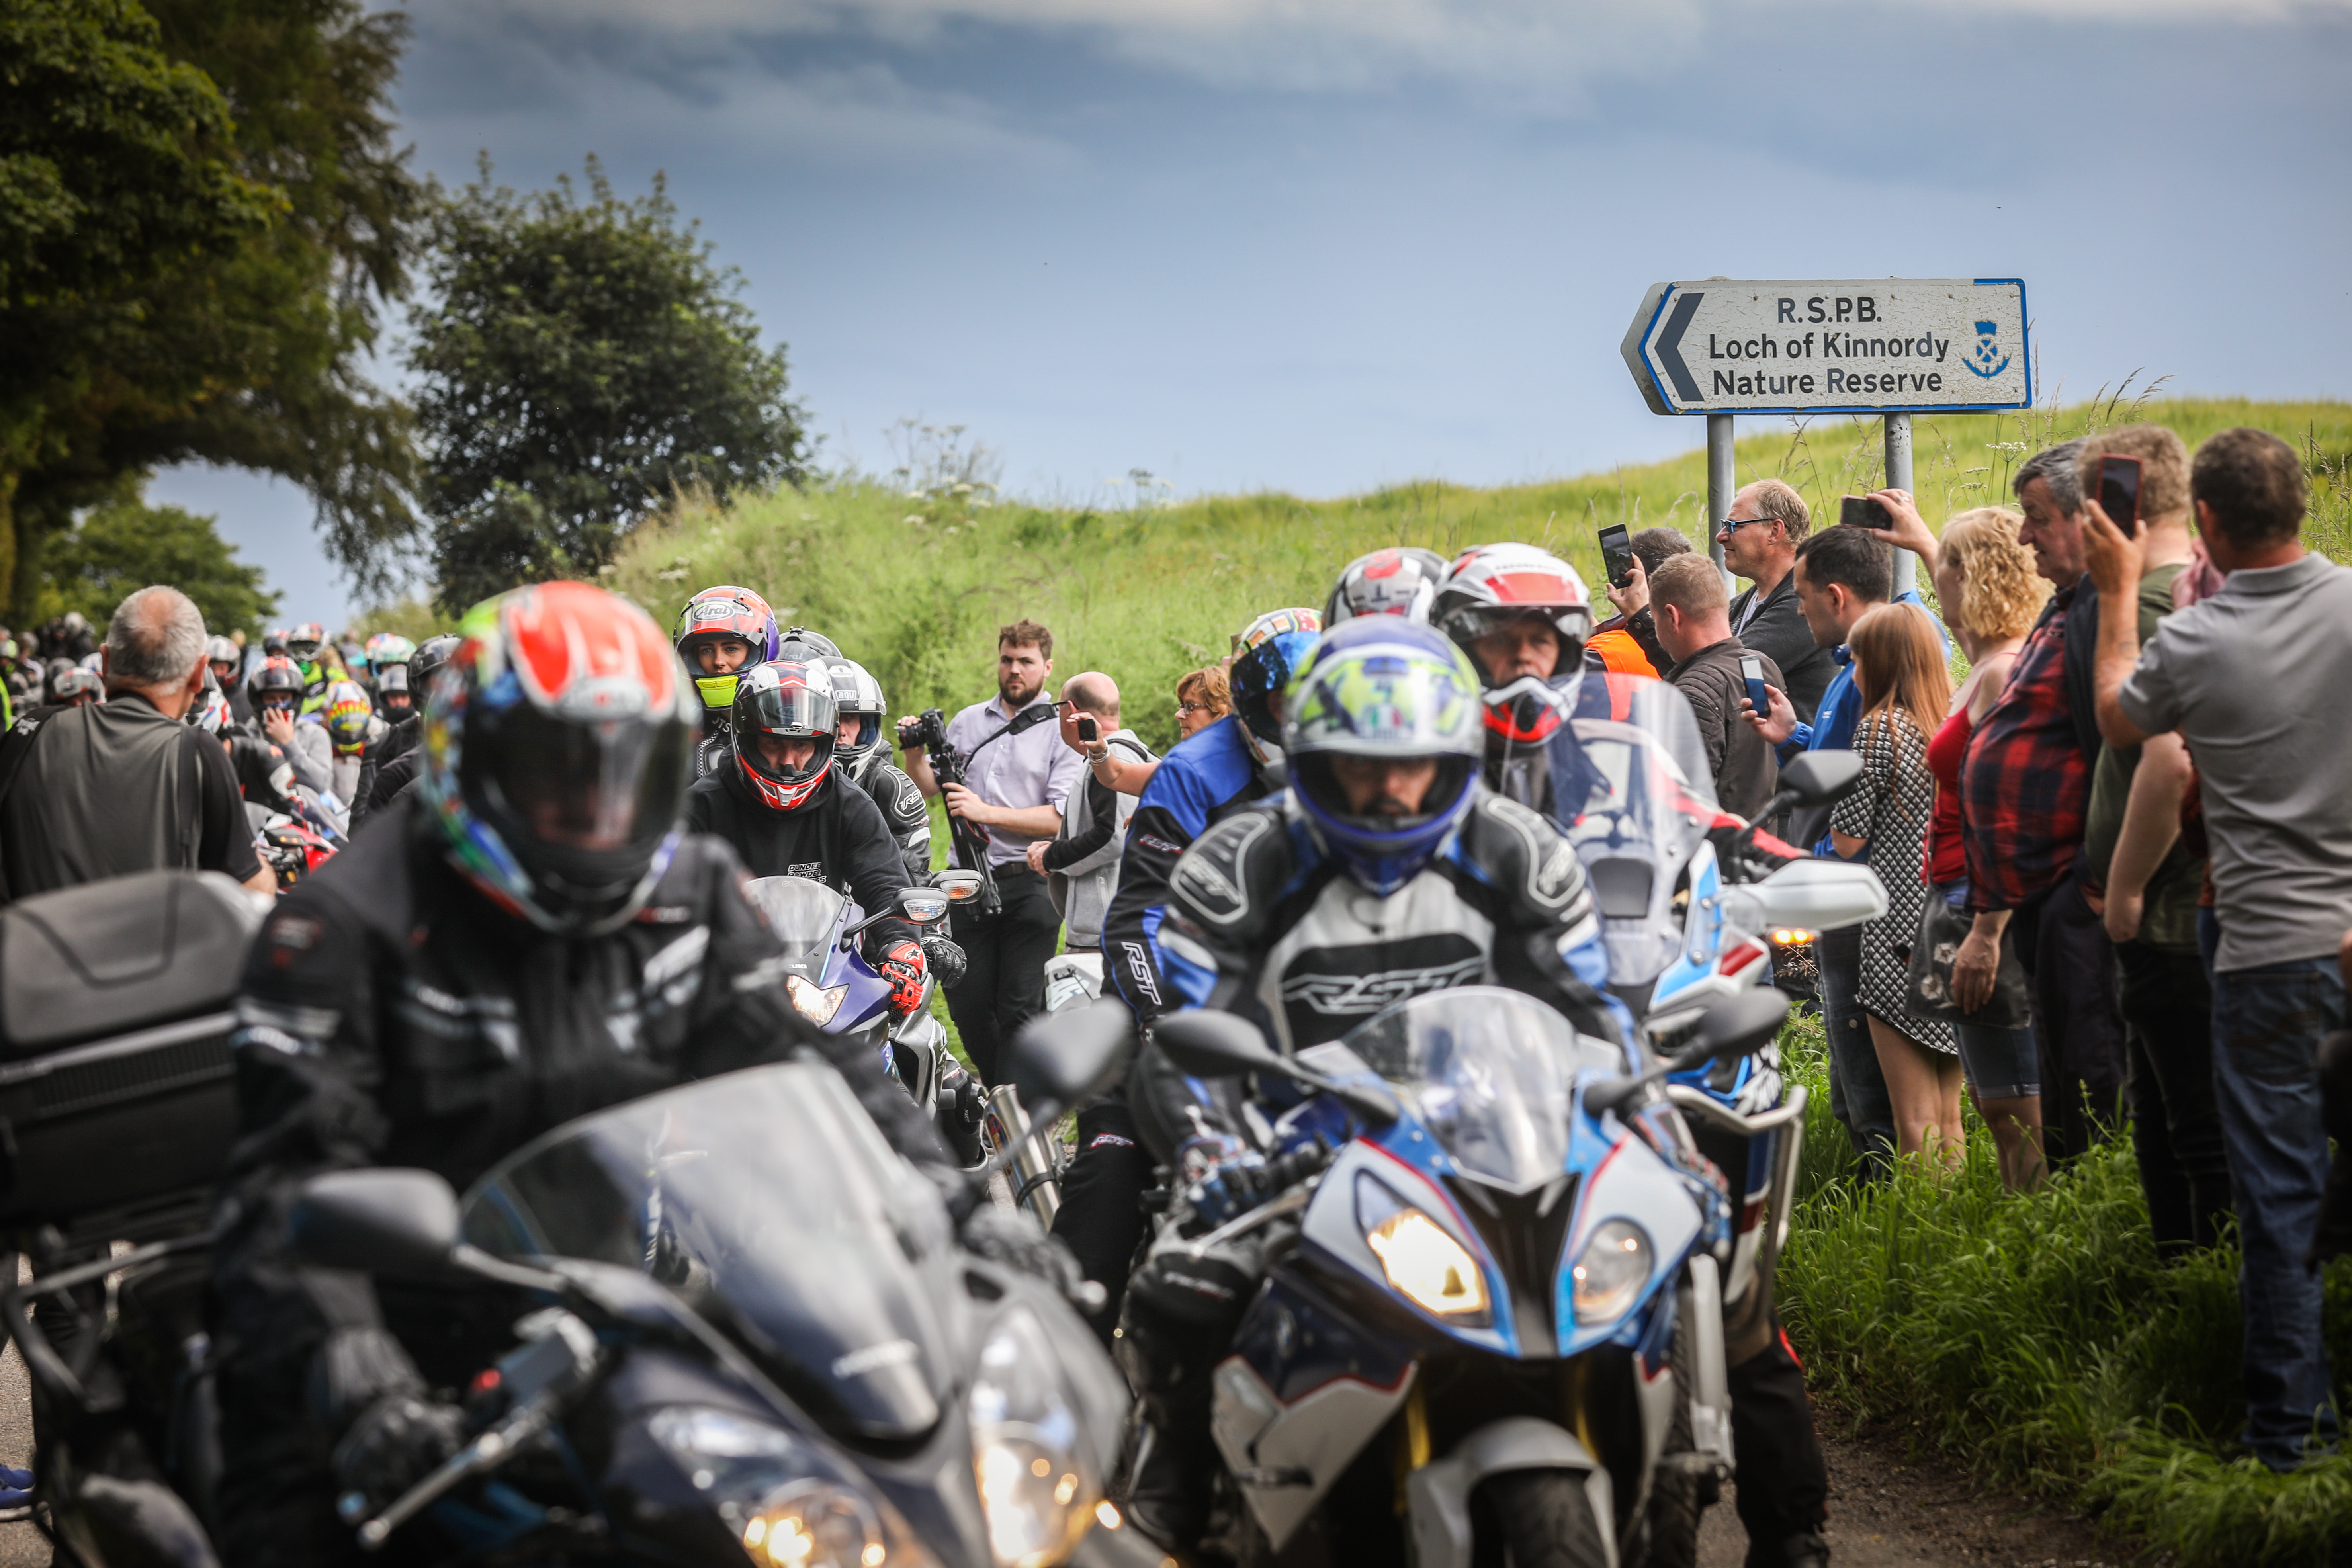 Hundreds of bikers from across Scotland turned out for the Steven Donaldson memorial ride last July.